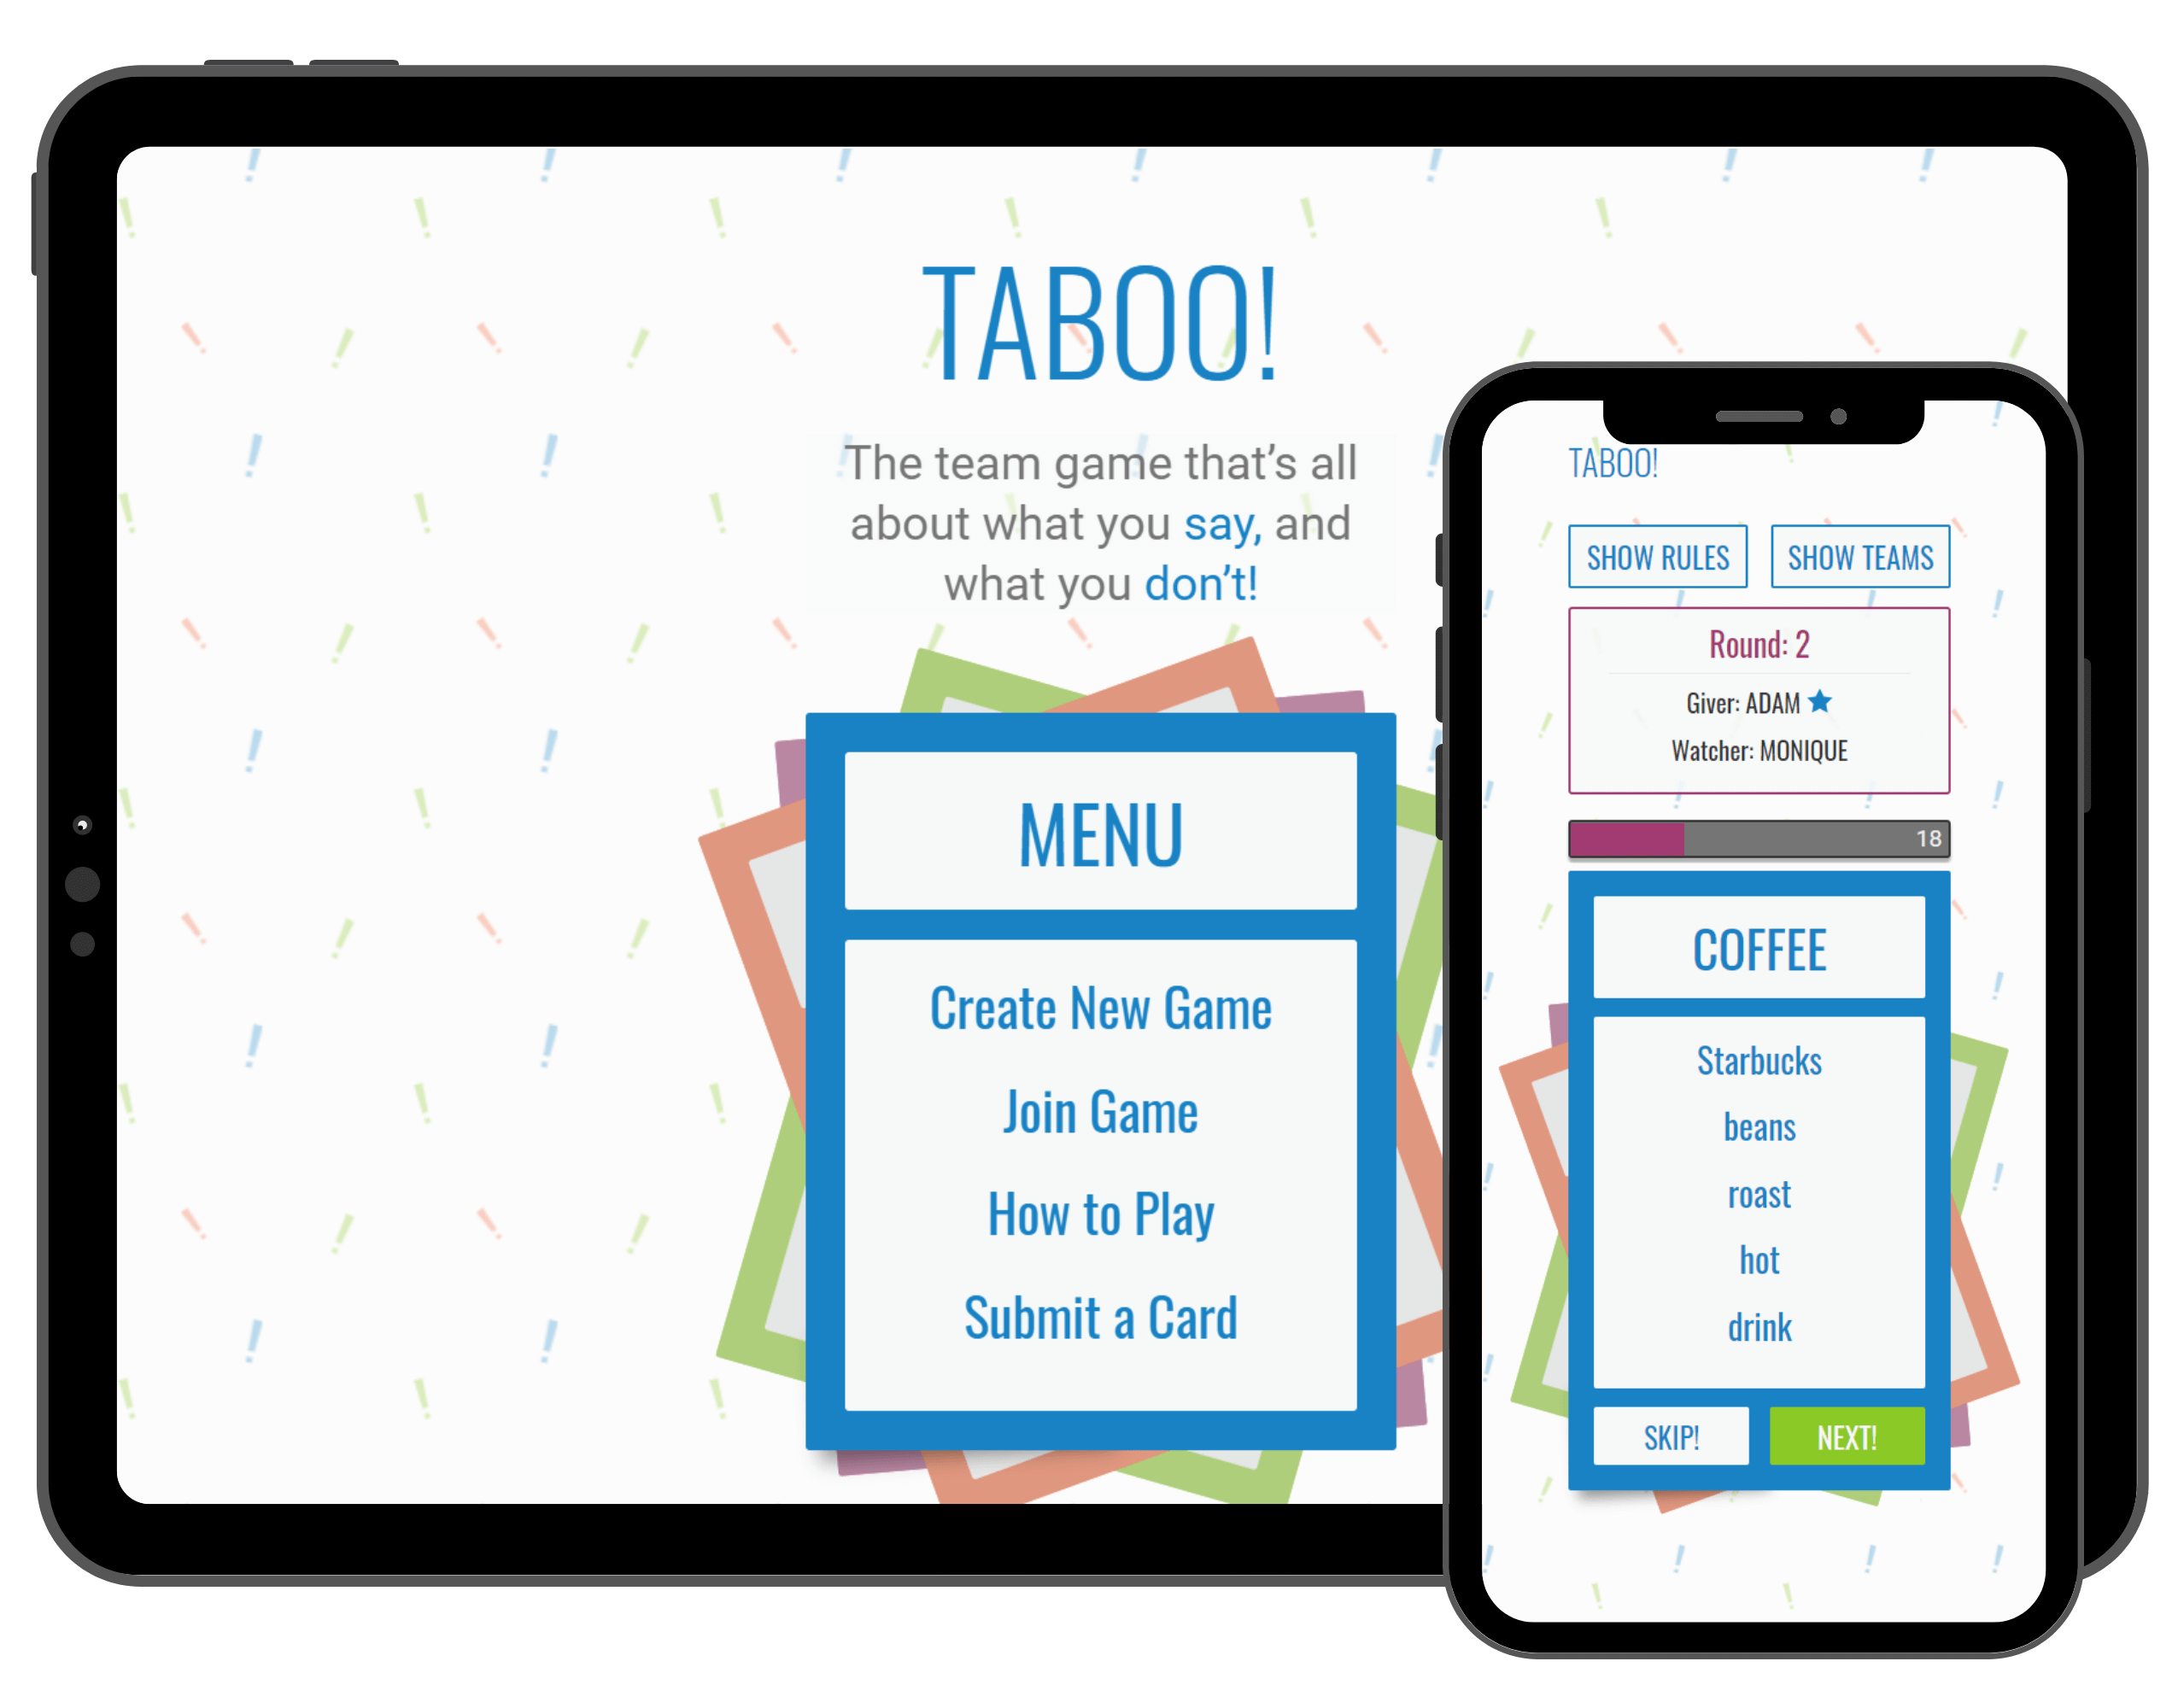 Taboo application displayed in ipad and iphone